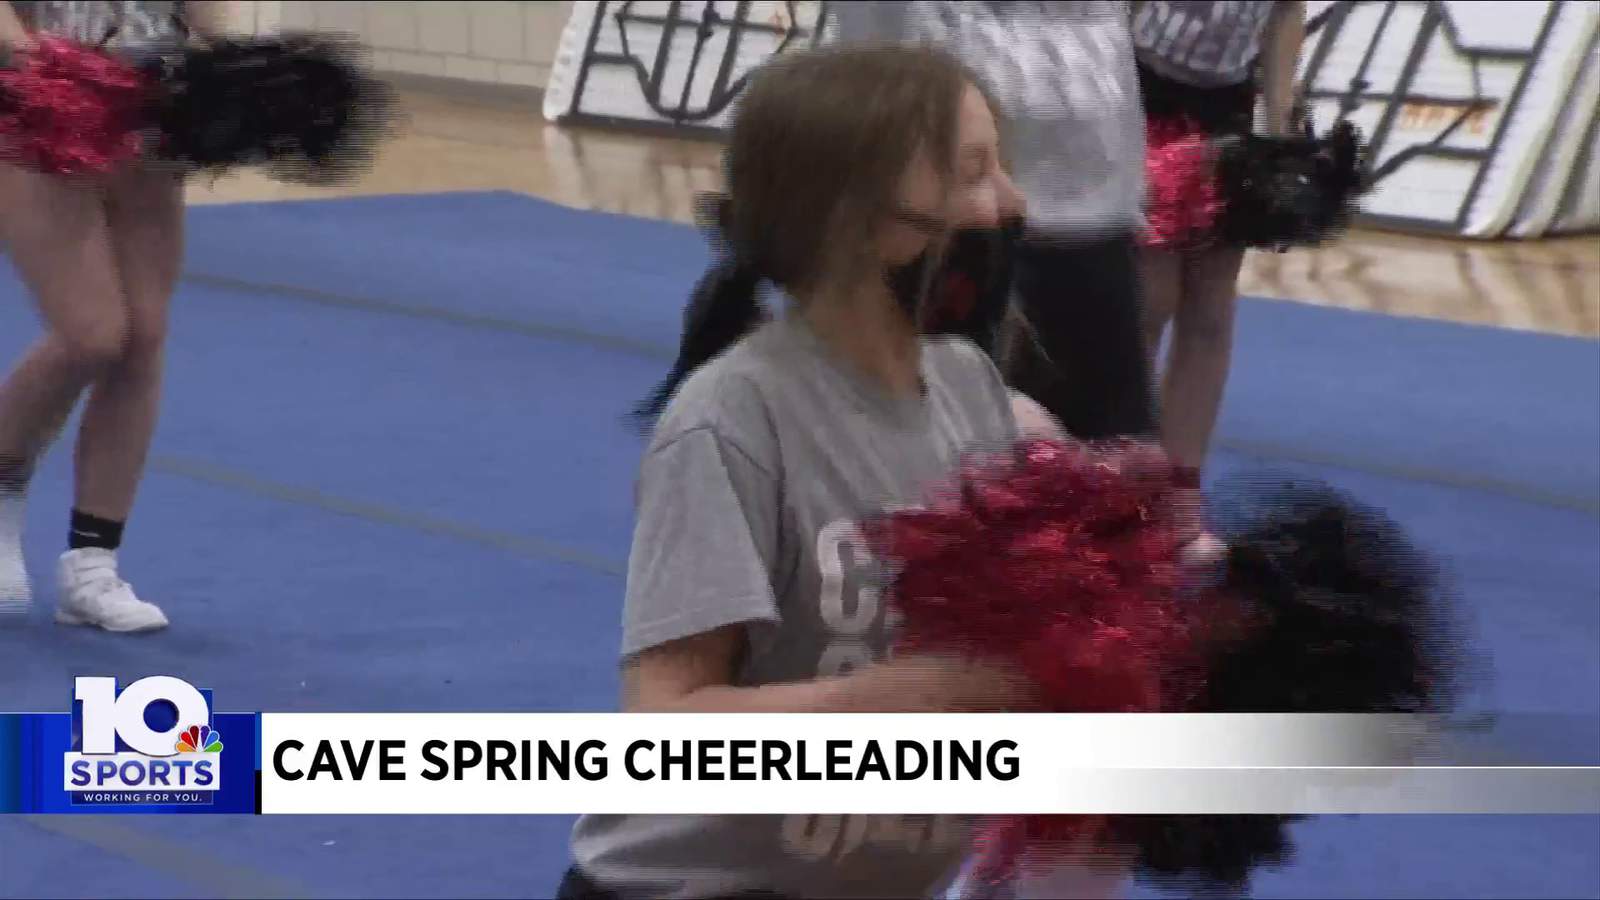 “It can be taken away at any moment” Cave Spring competition cheer season underway, despite initial setback